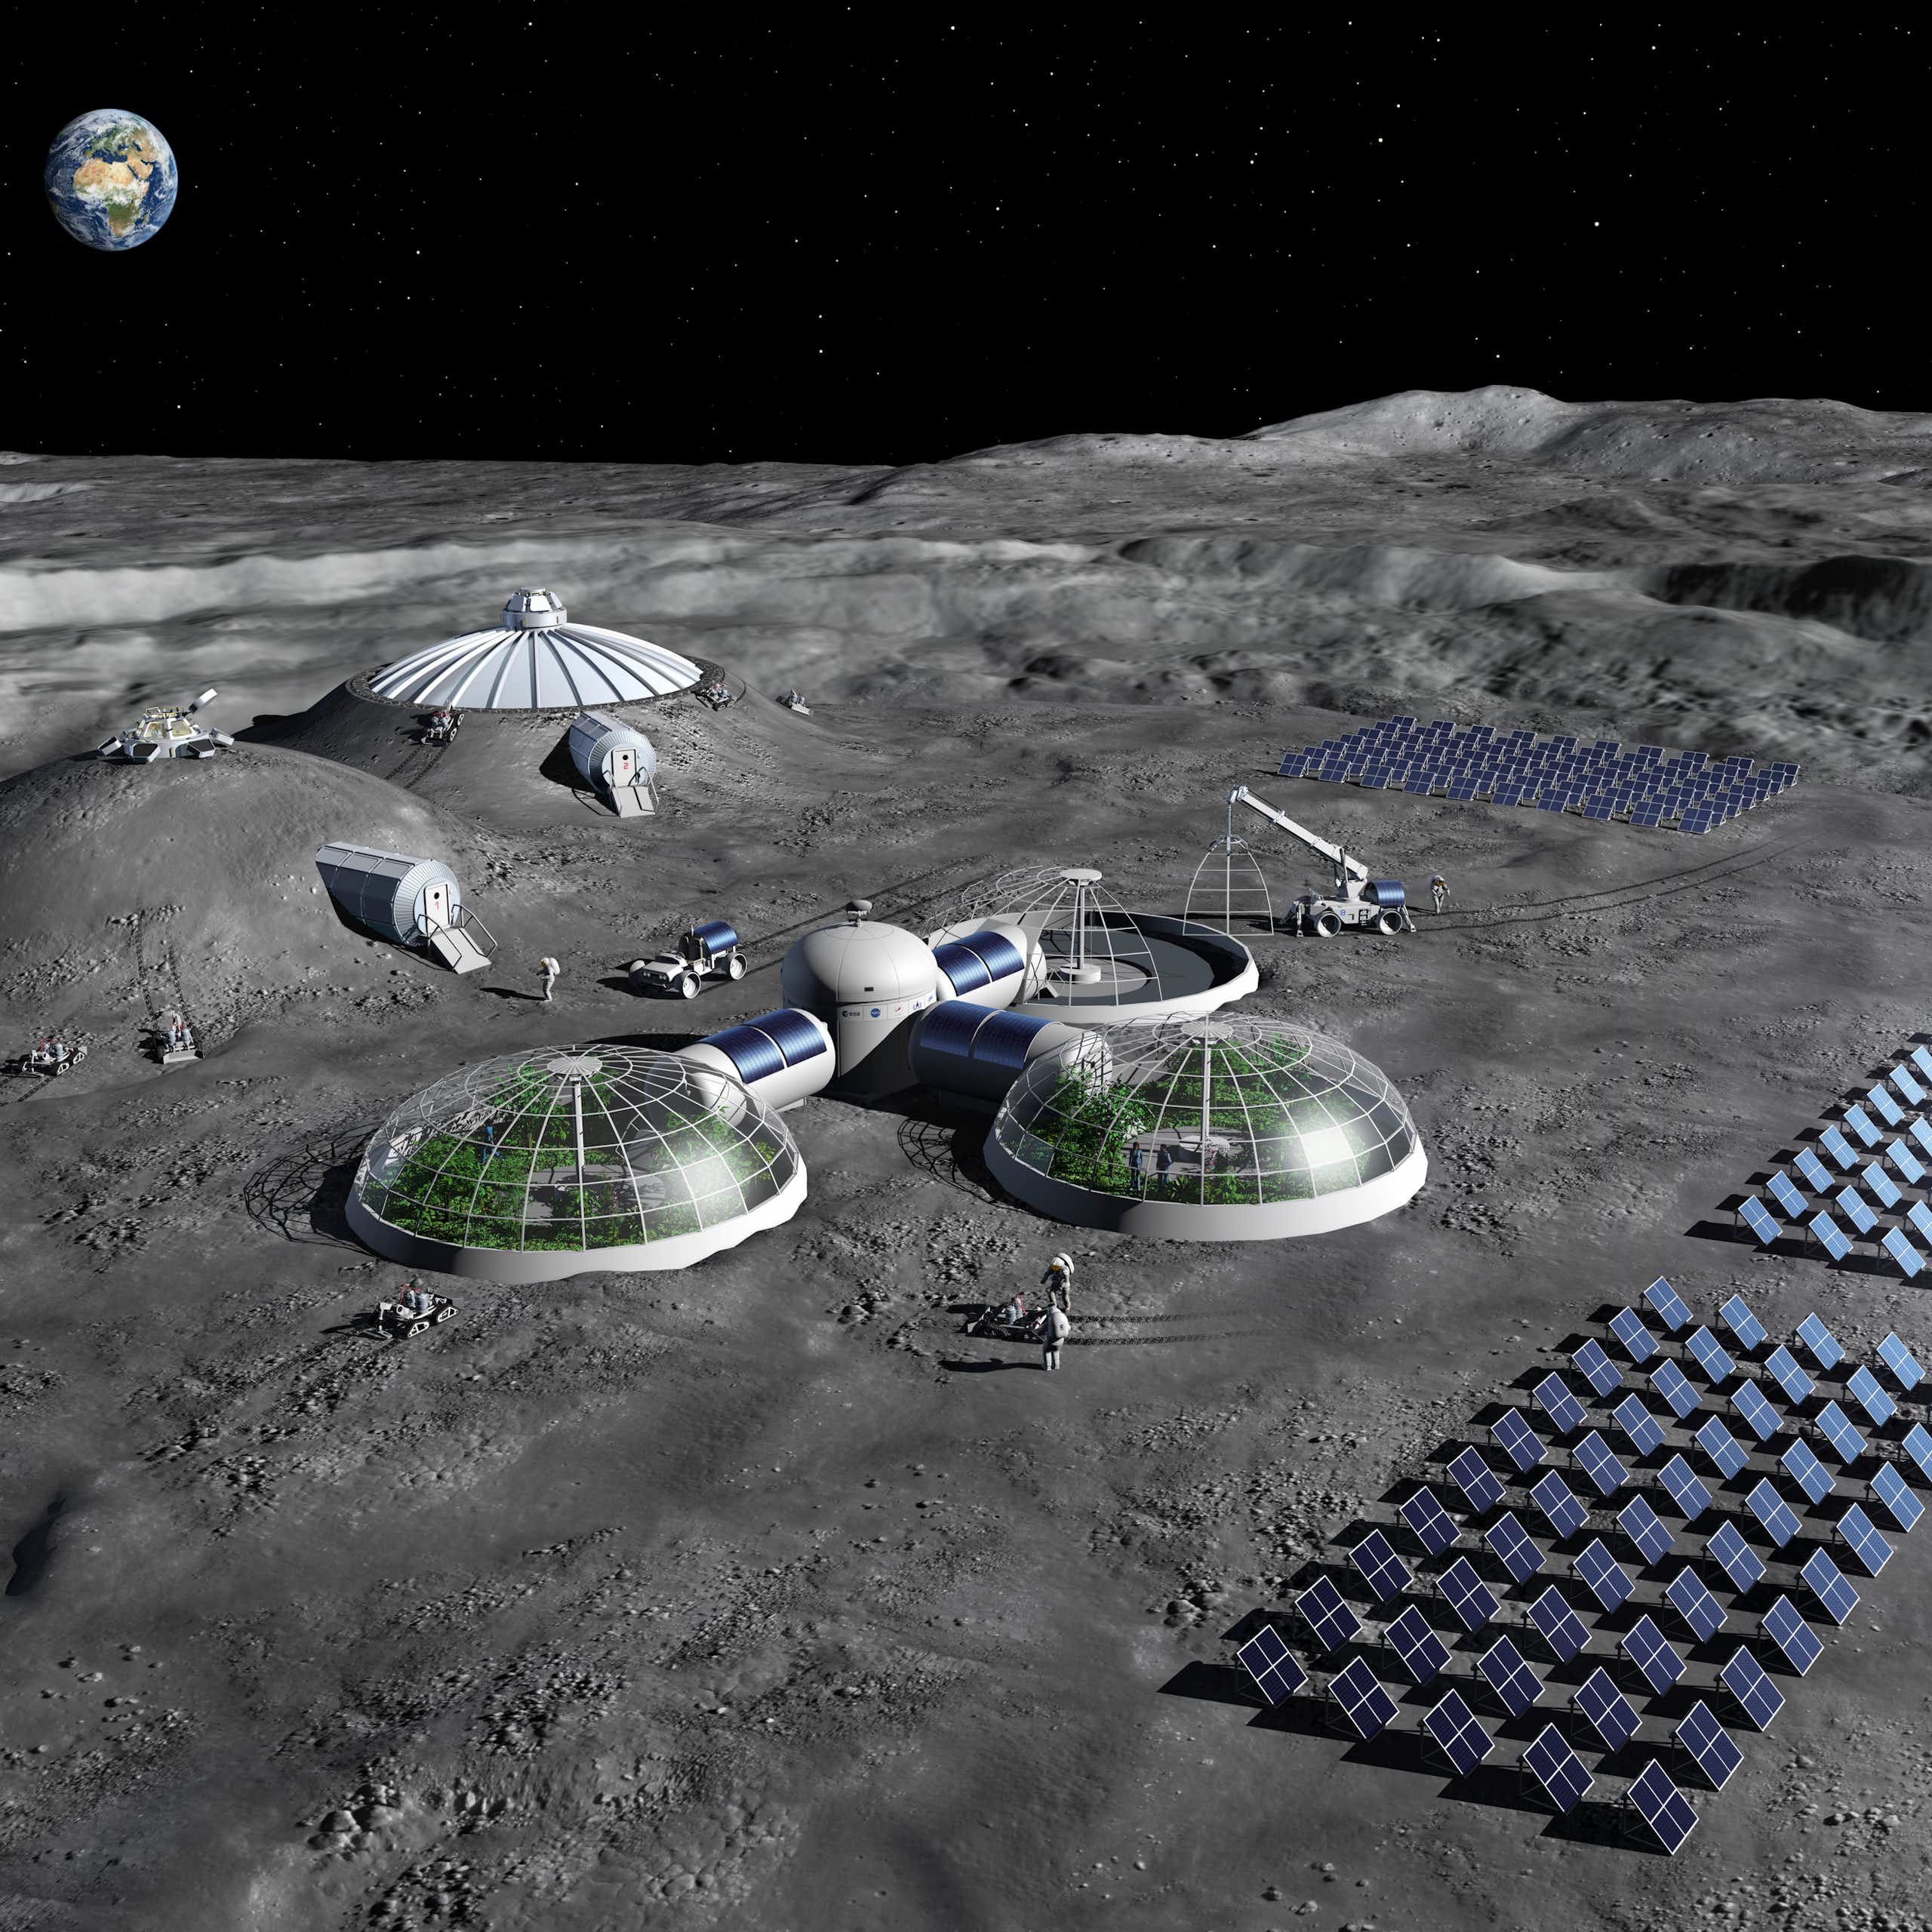 An illustration of a base on the Moon, with three solar panel arrays, a building with dome-shaped greenhouses, and the Earth visible in the sky in the background.